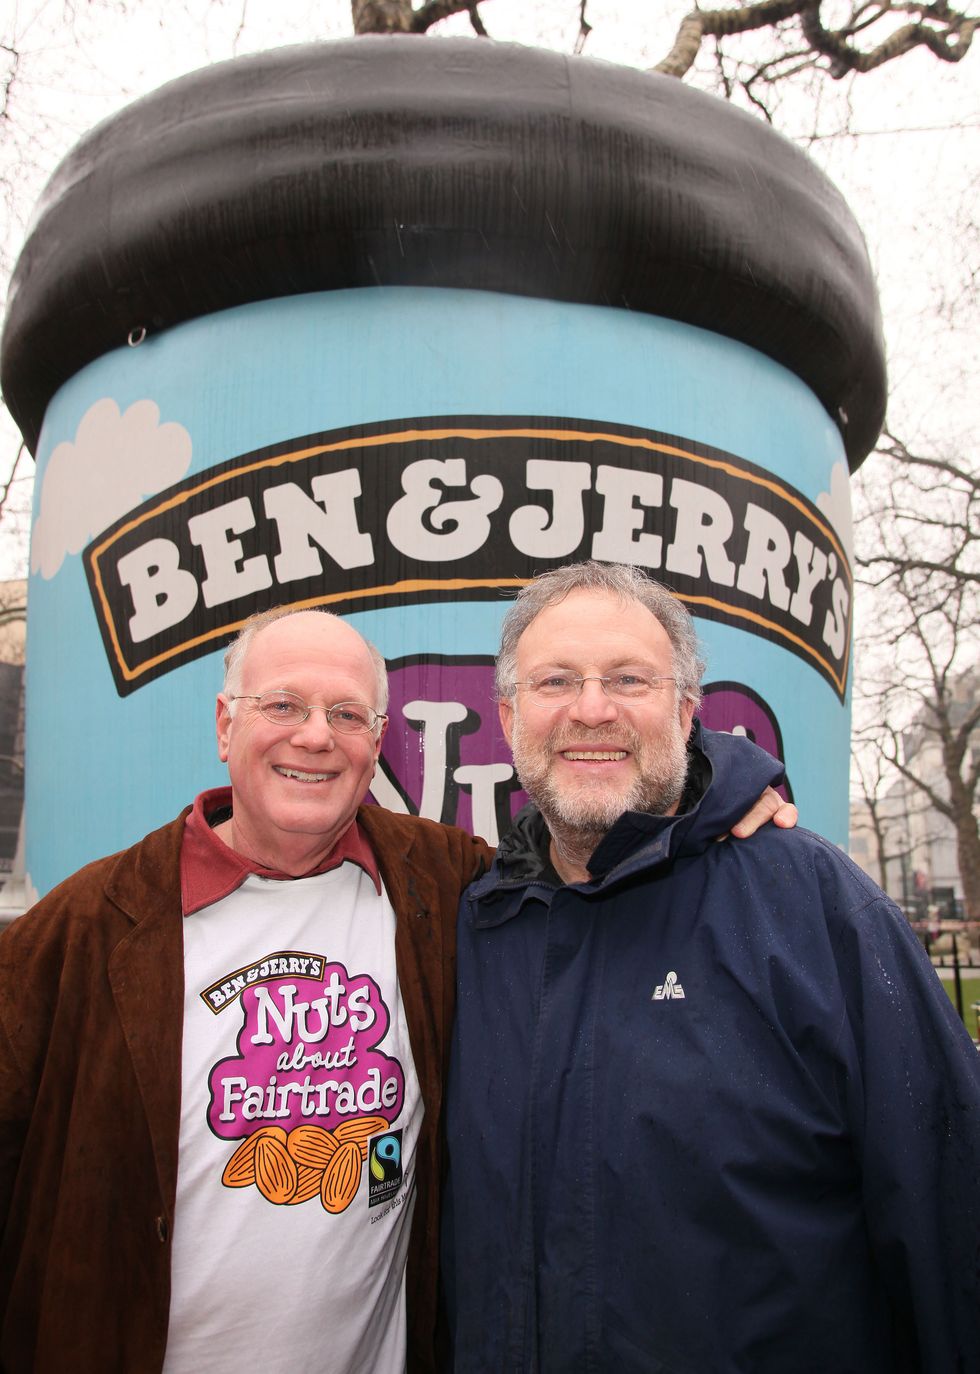 Ben and Jerry have been arrested